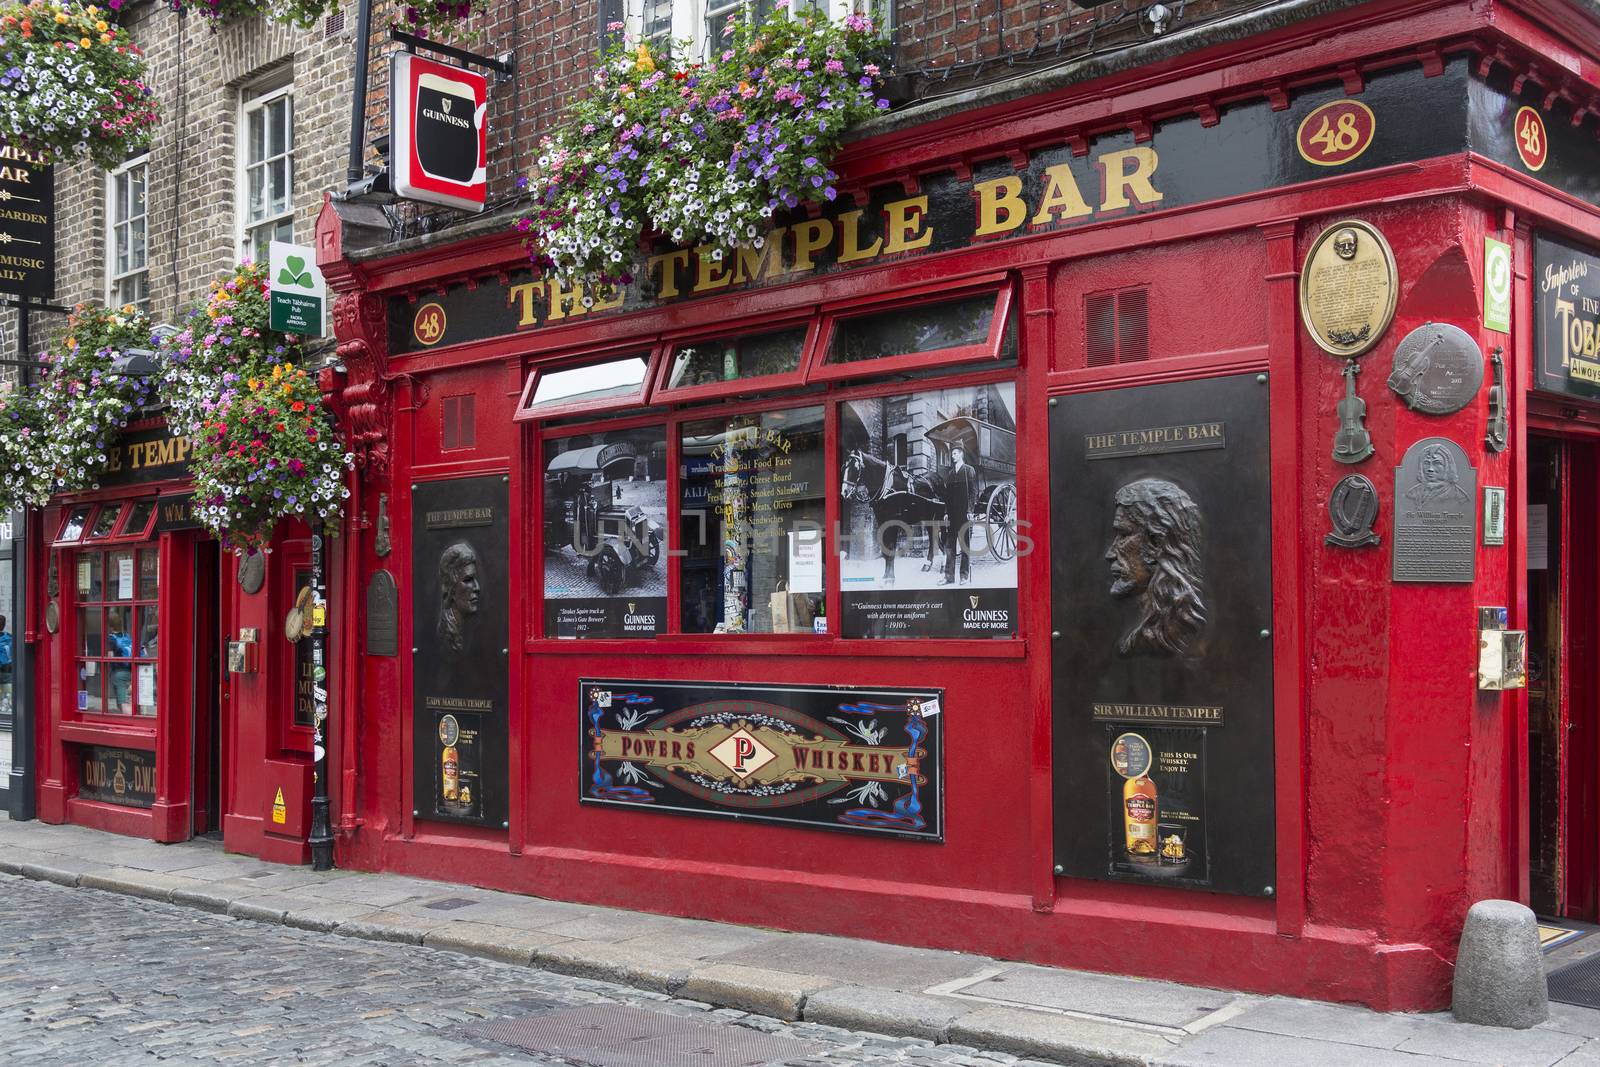 The famous Temple Bar Irish Pub in the Temple Bar District of Dublin in the Republic of Ireland. Temple Bar is an area on the south bank of the River Liffey. It is promoted as Dublin's cultural quarter and has a lively nightlife that is popular with tourists. Popular venues include The Palace Bar, The Temple Bar Pub, Oliver St.John Gogarty's and The Auld Dubliner.